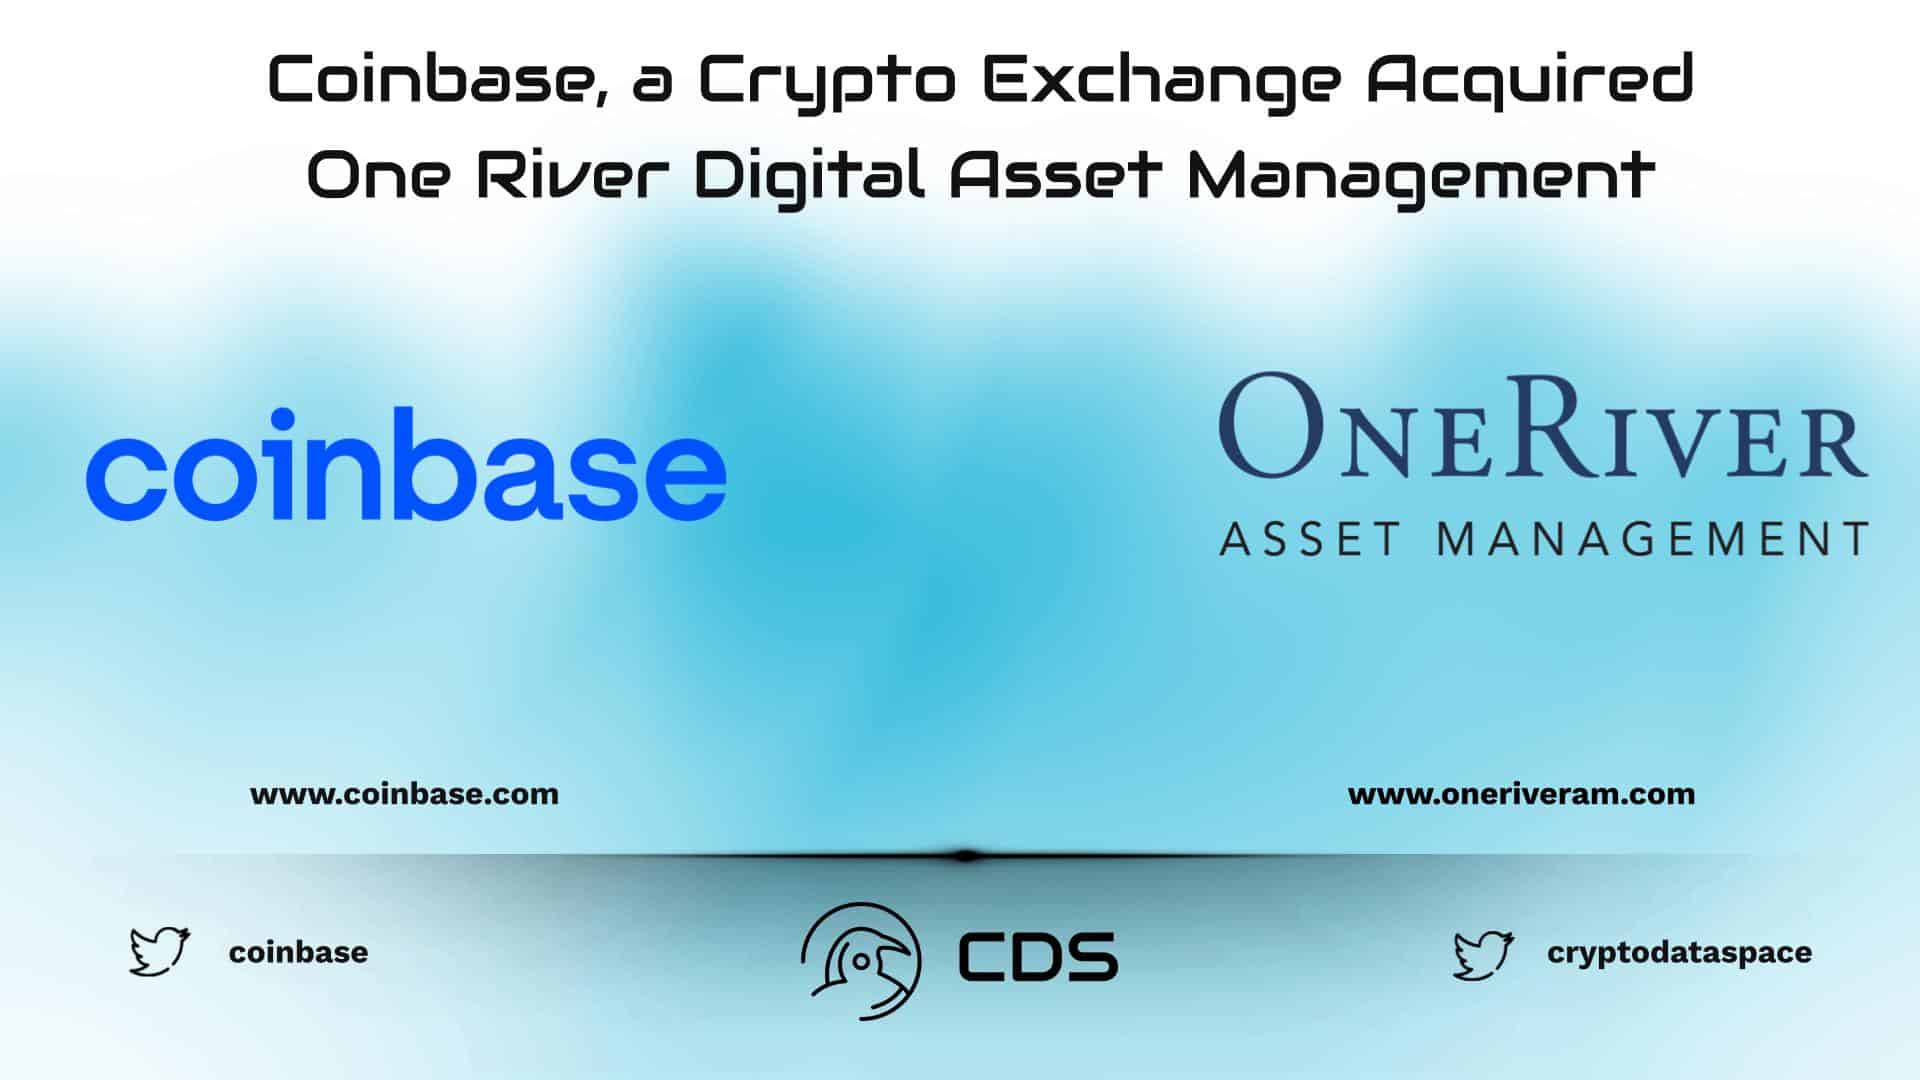 Coinbase, a Crypto Exchange Acquired One River Digital Asset Management